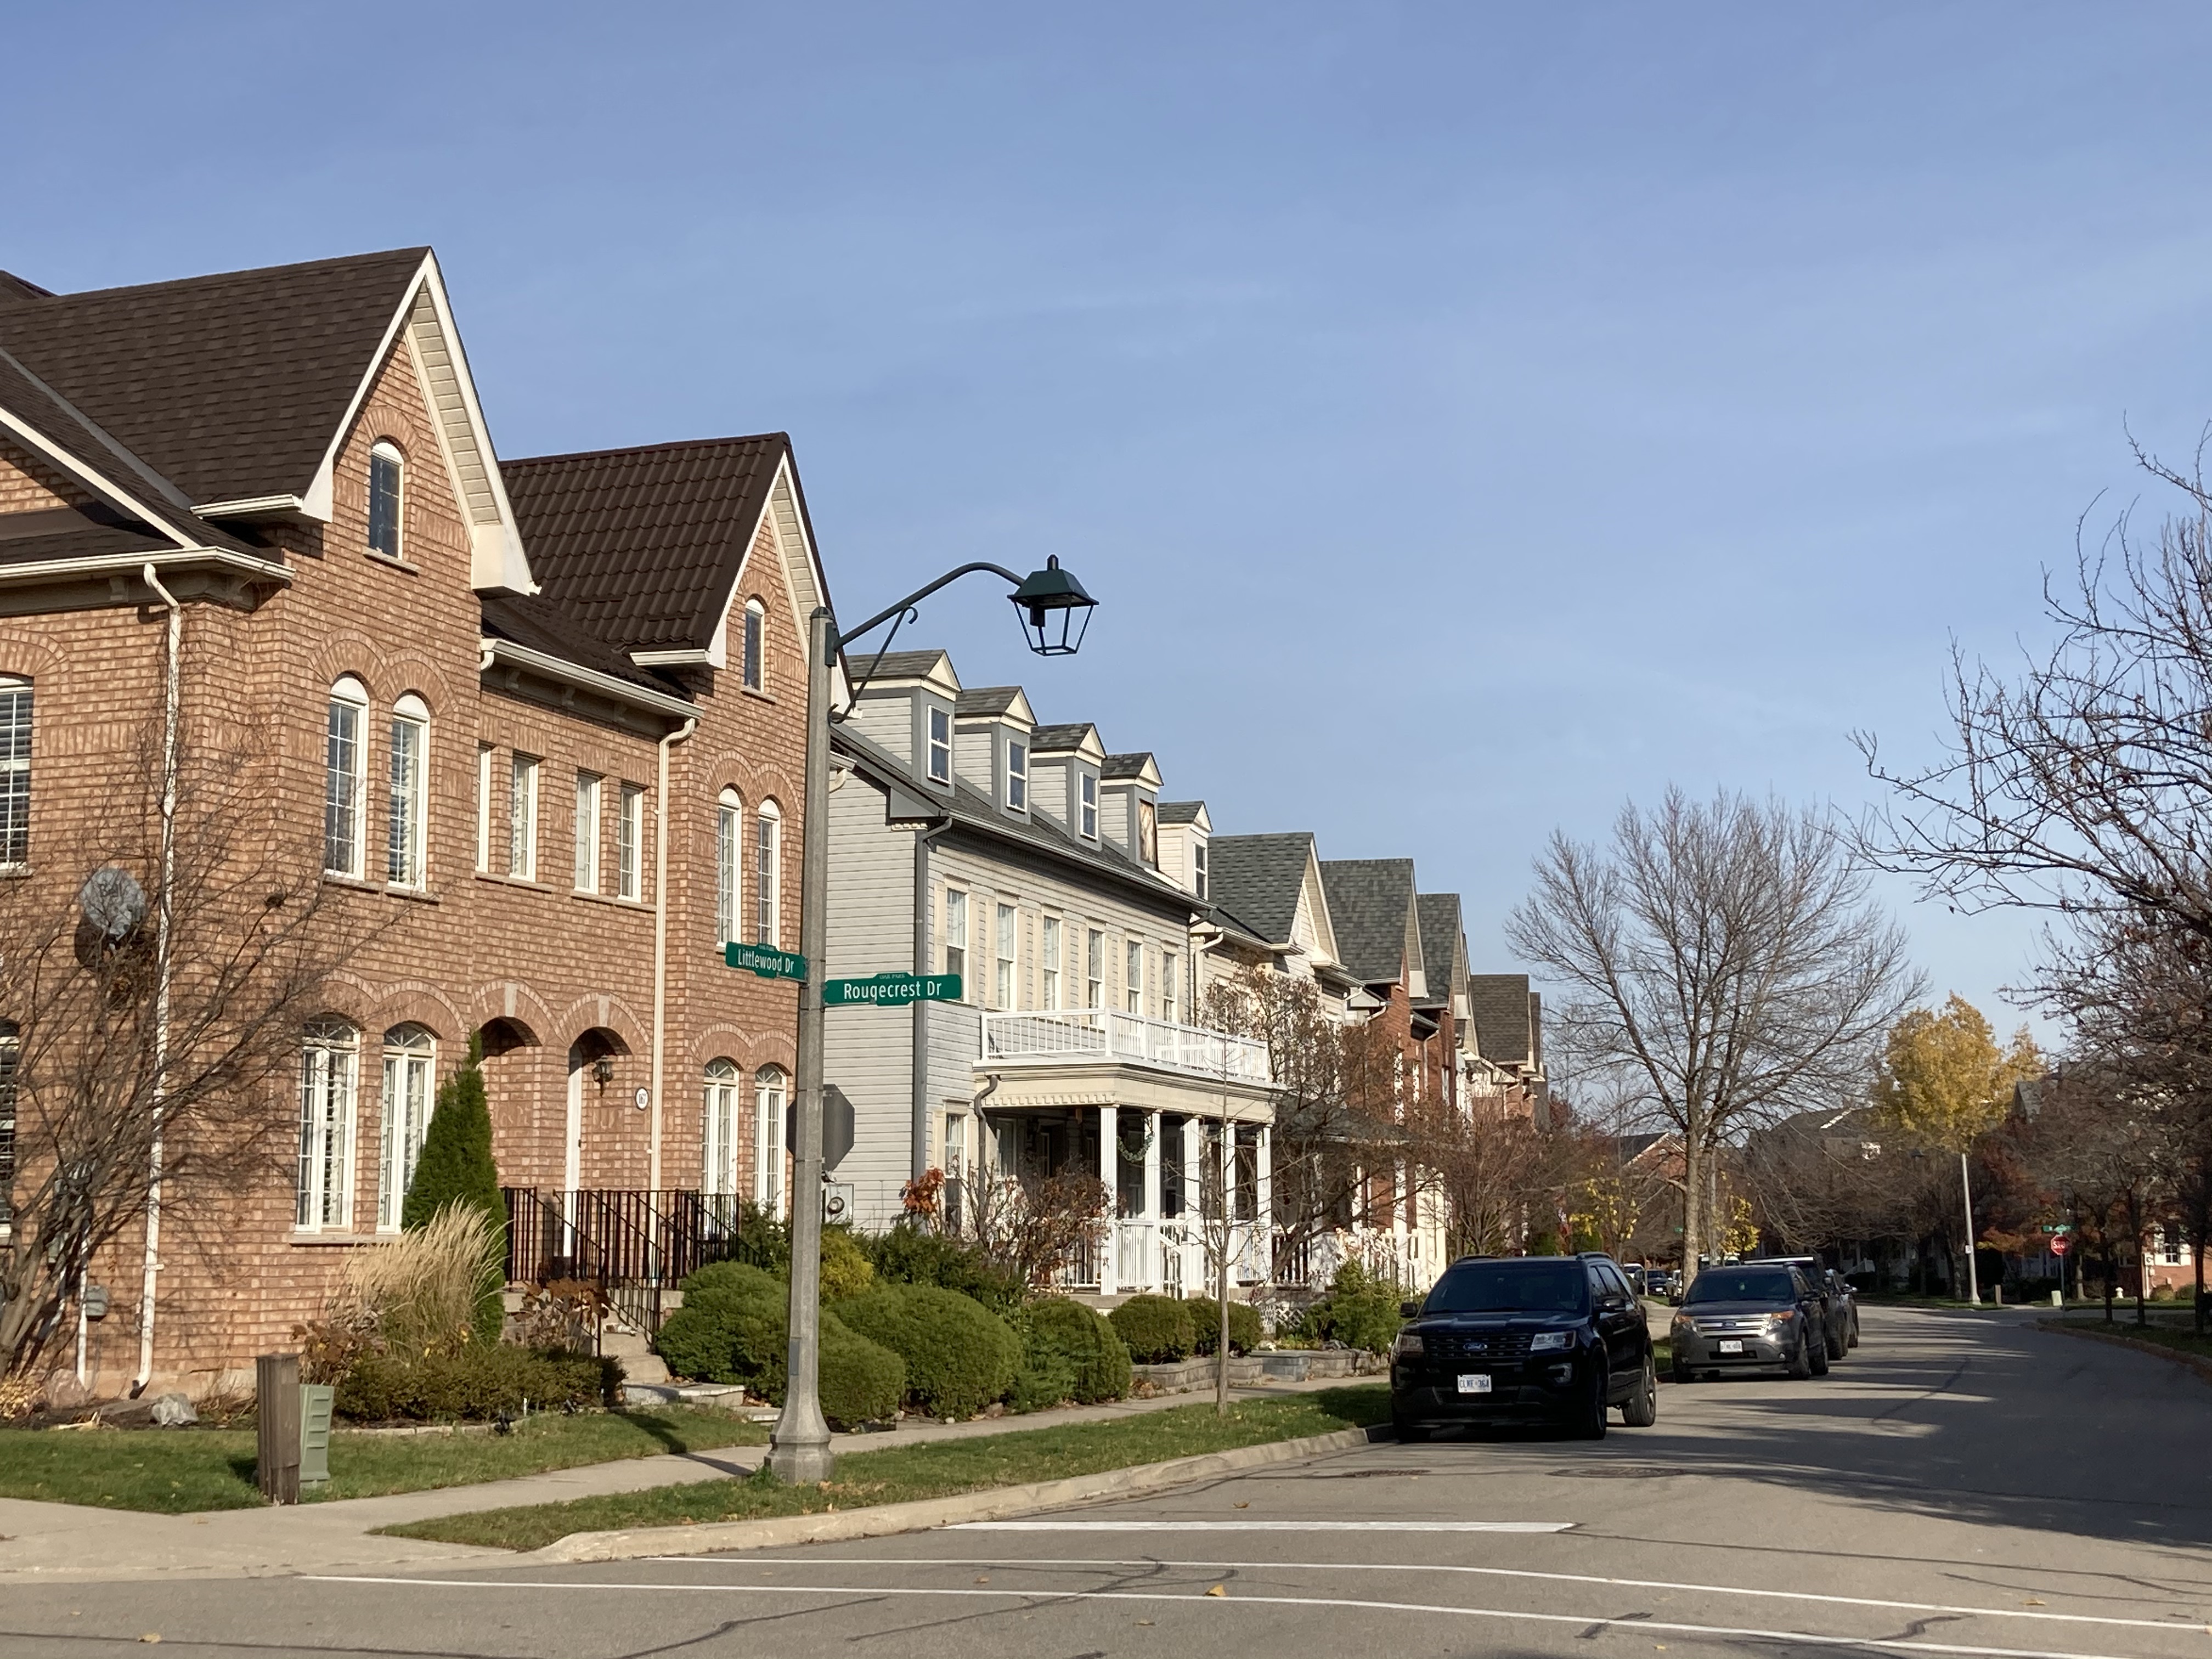 OakPark in River Oaks is an example of the town